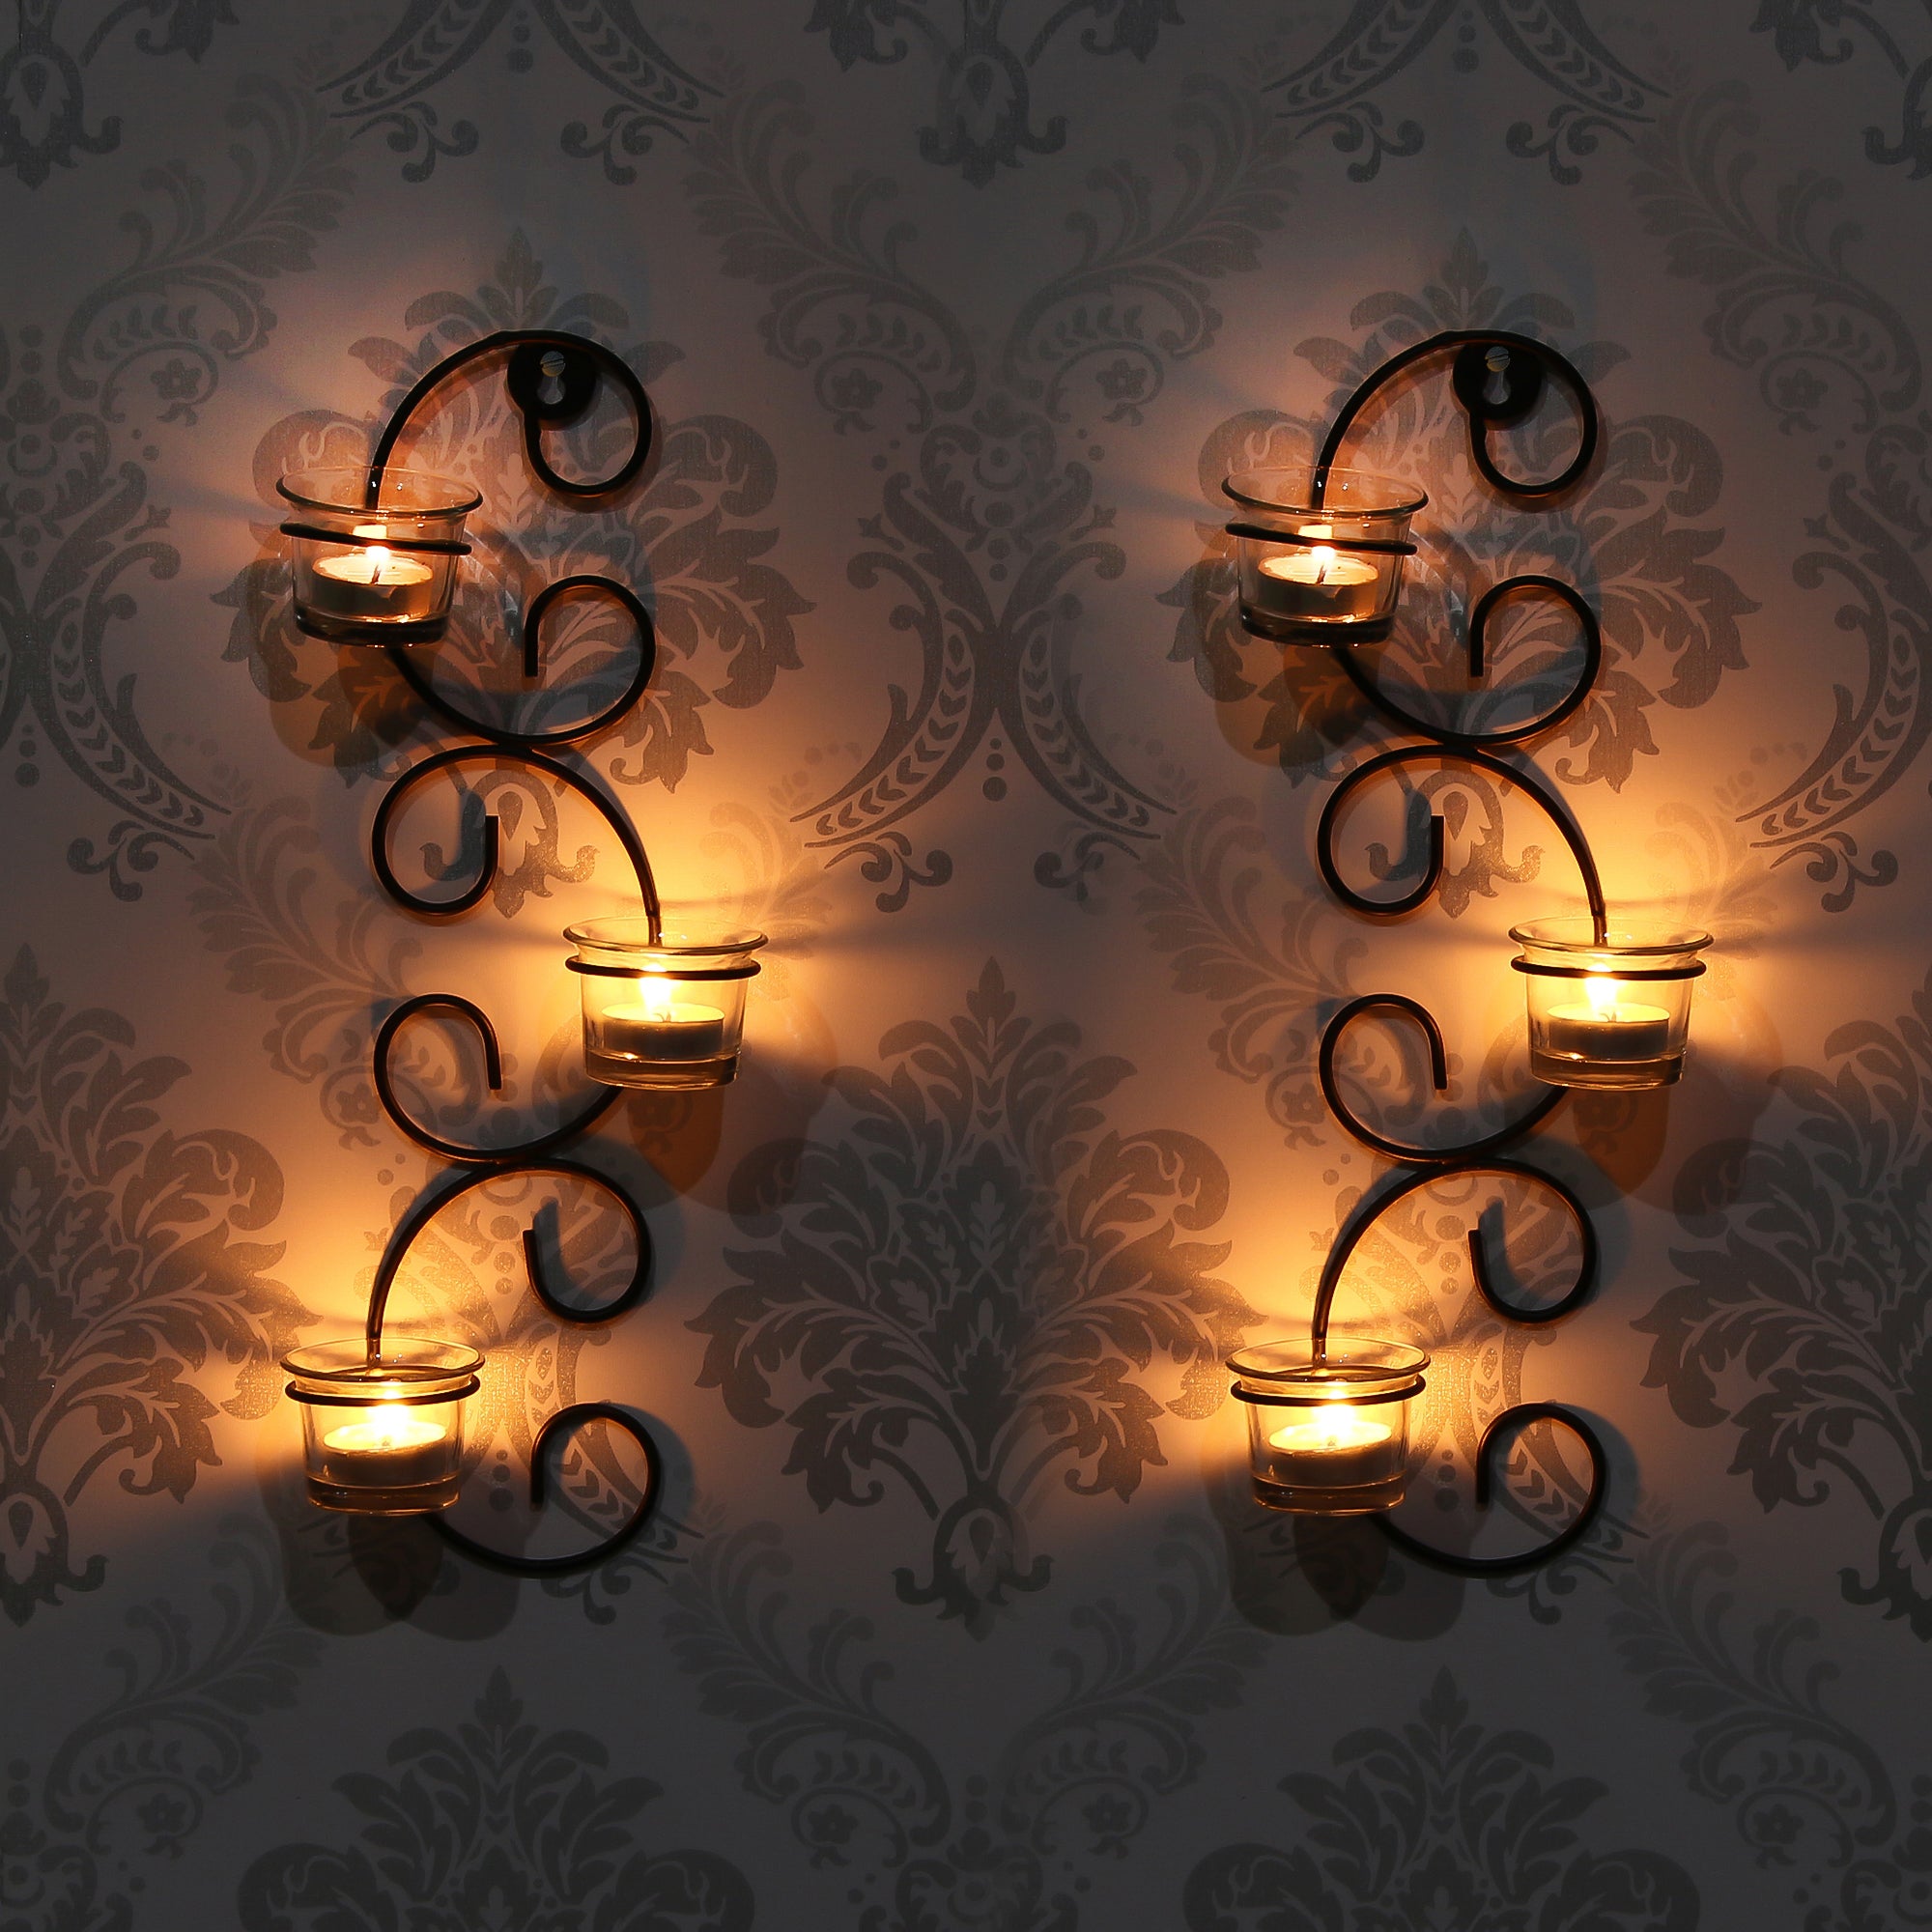 Set of 2 Wall sconces with 6 Glass Cup Tea Light Holder